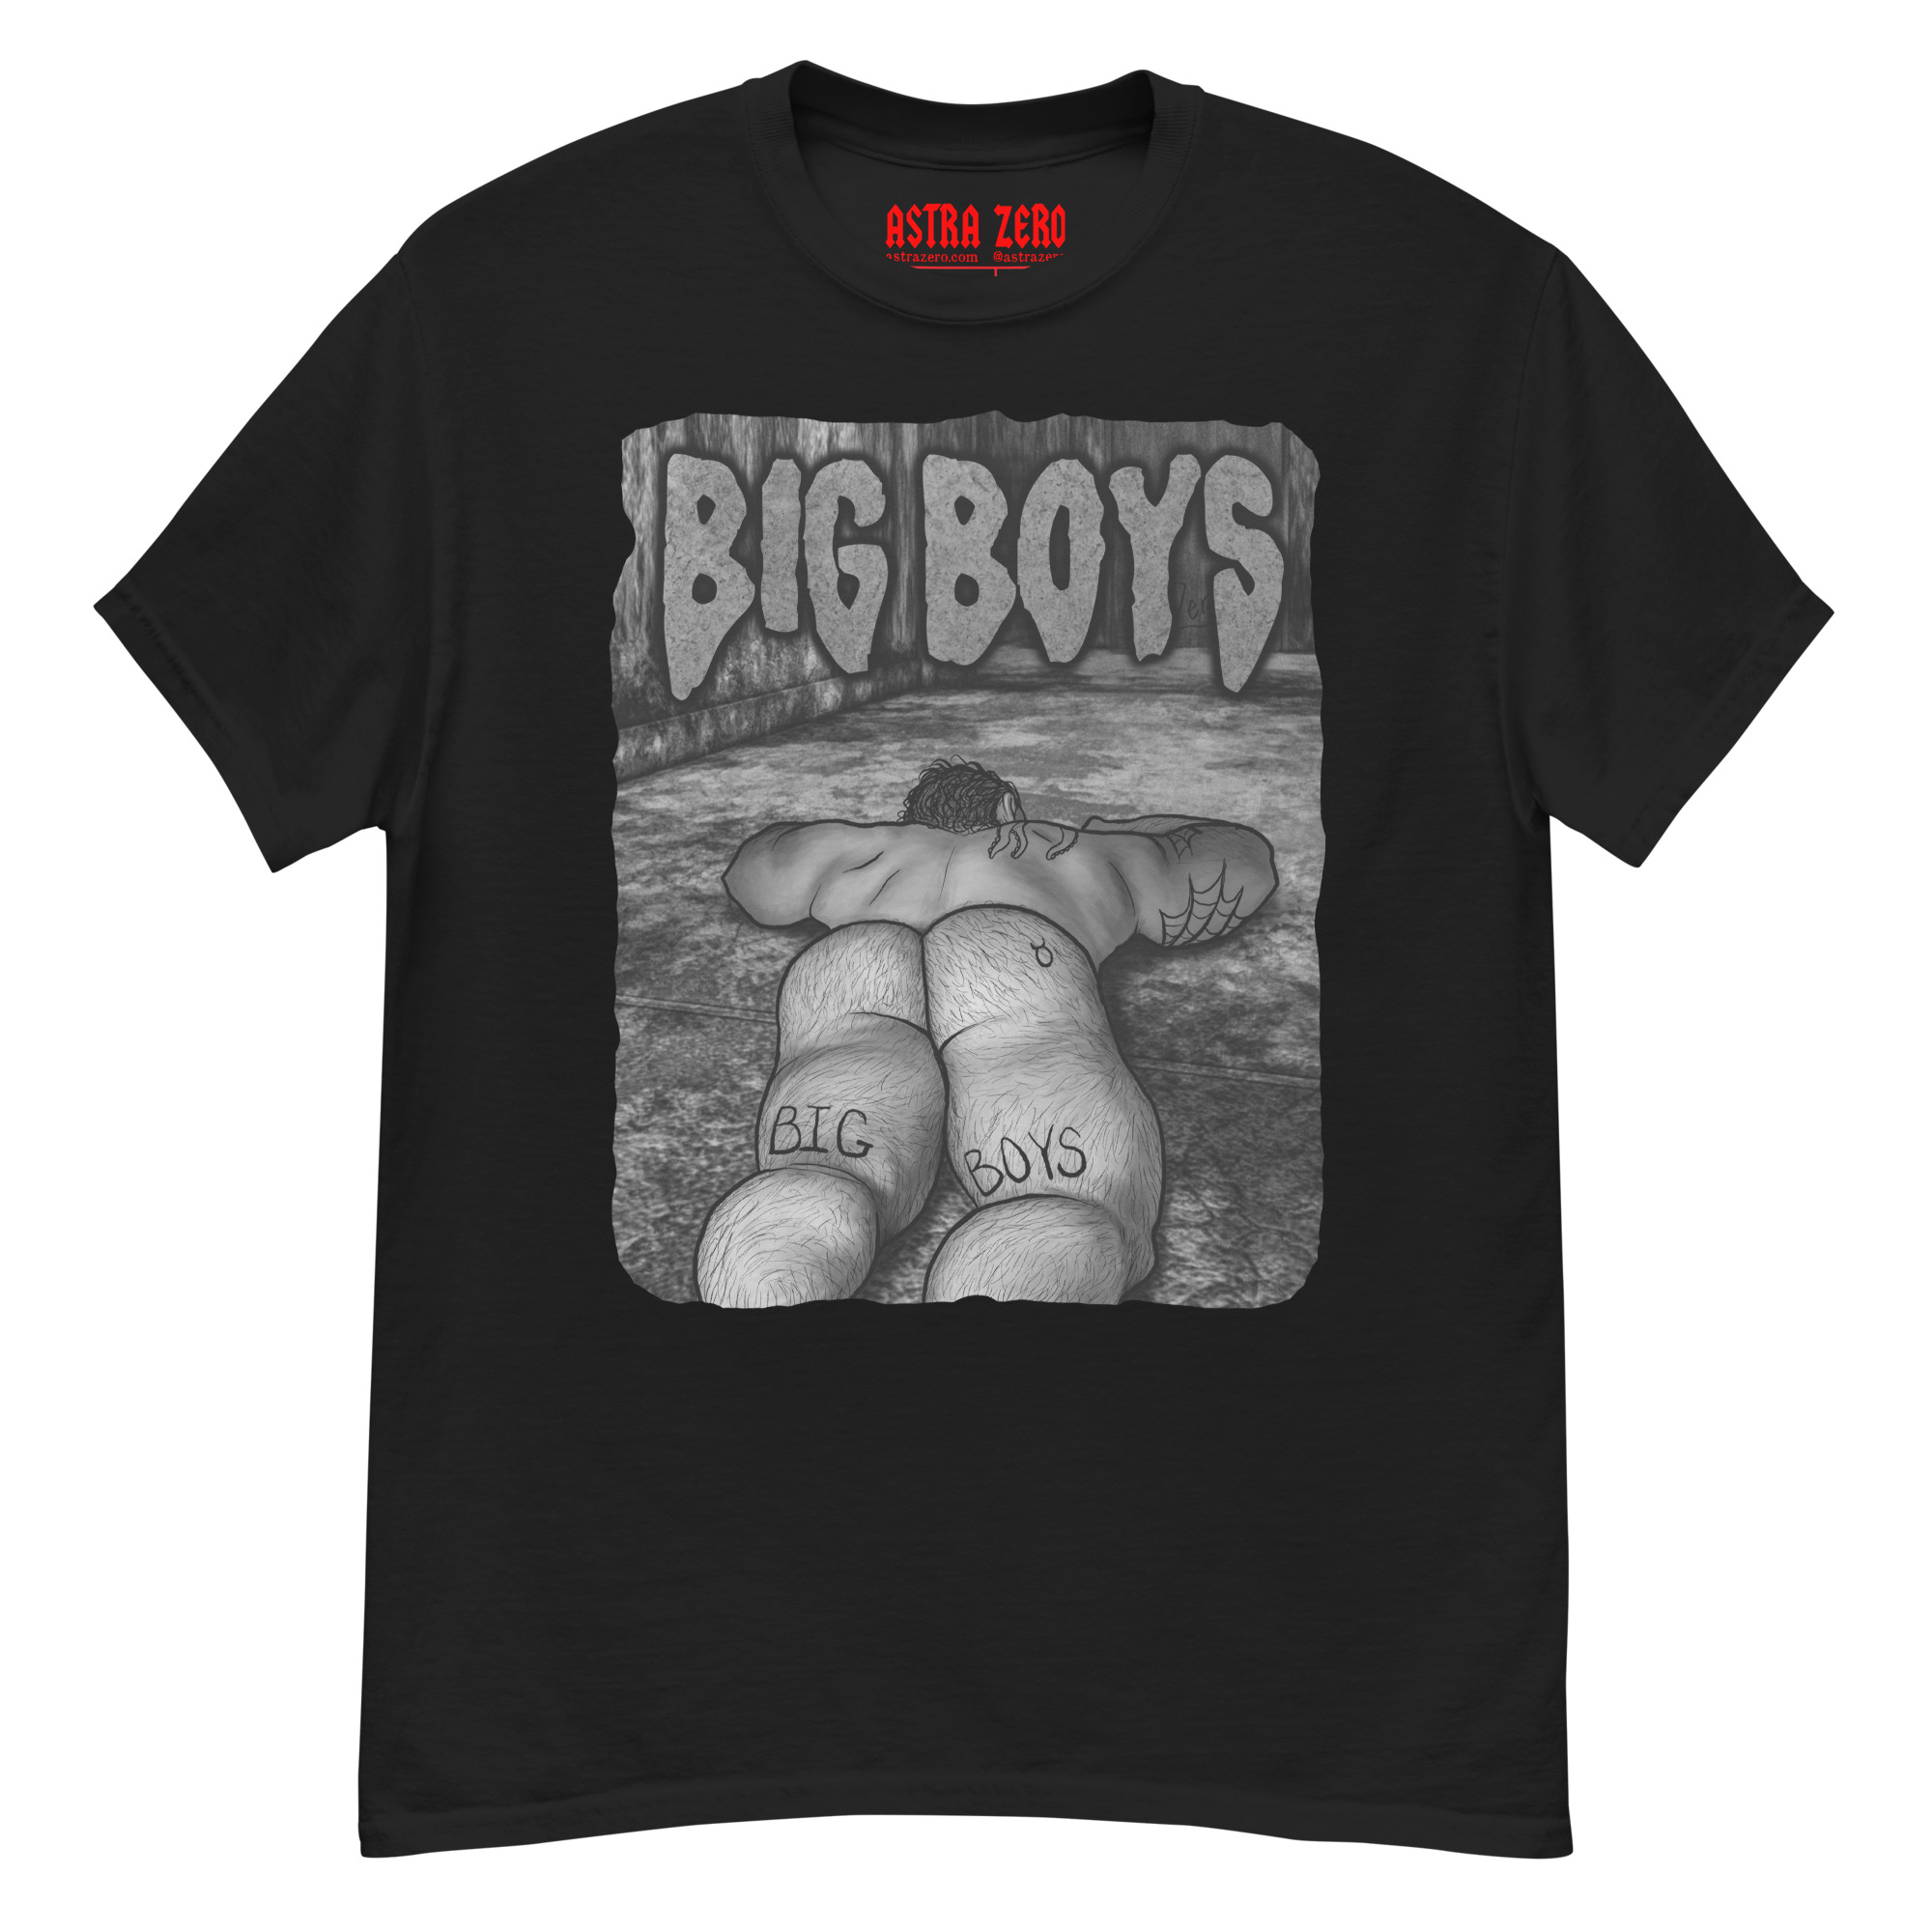 Featured image for “Big Boys (BW) - Men's classic tee”